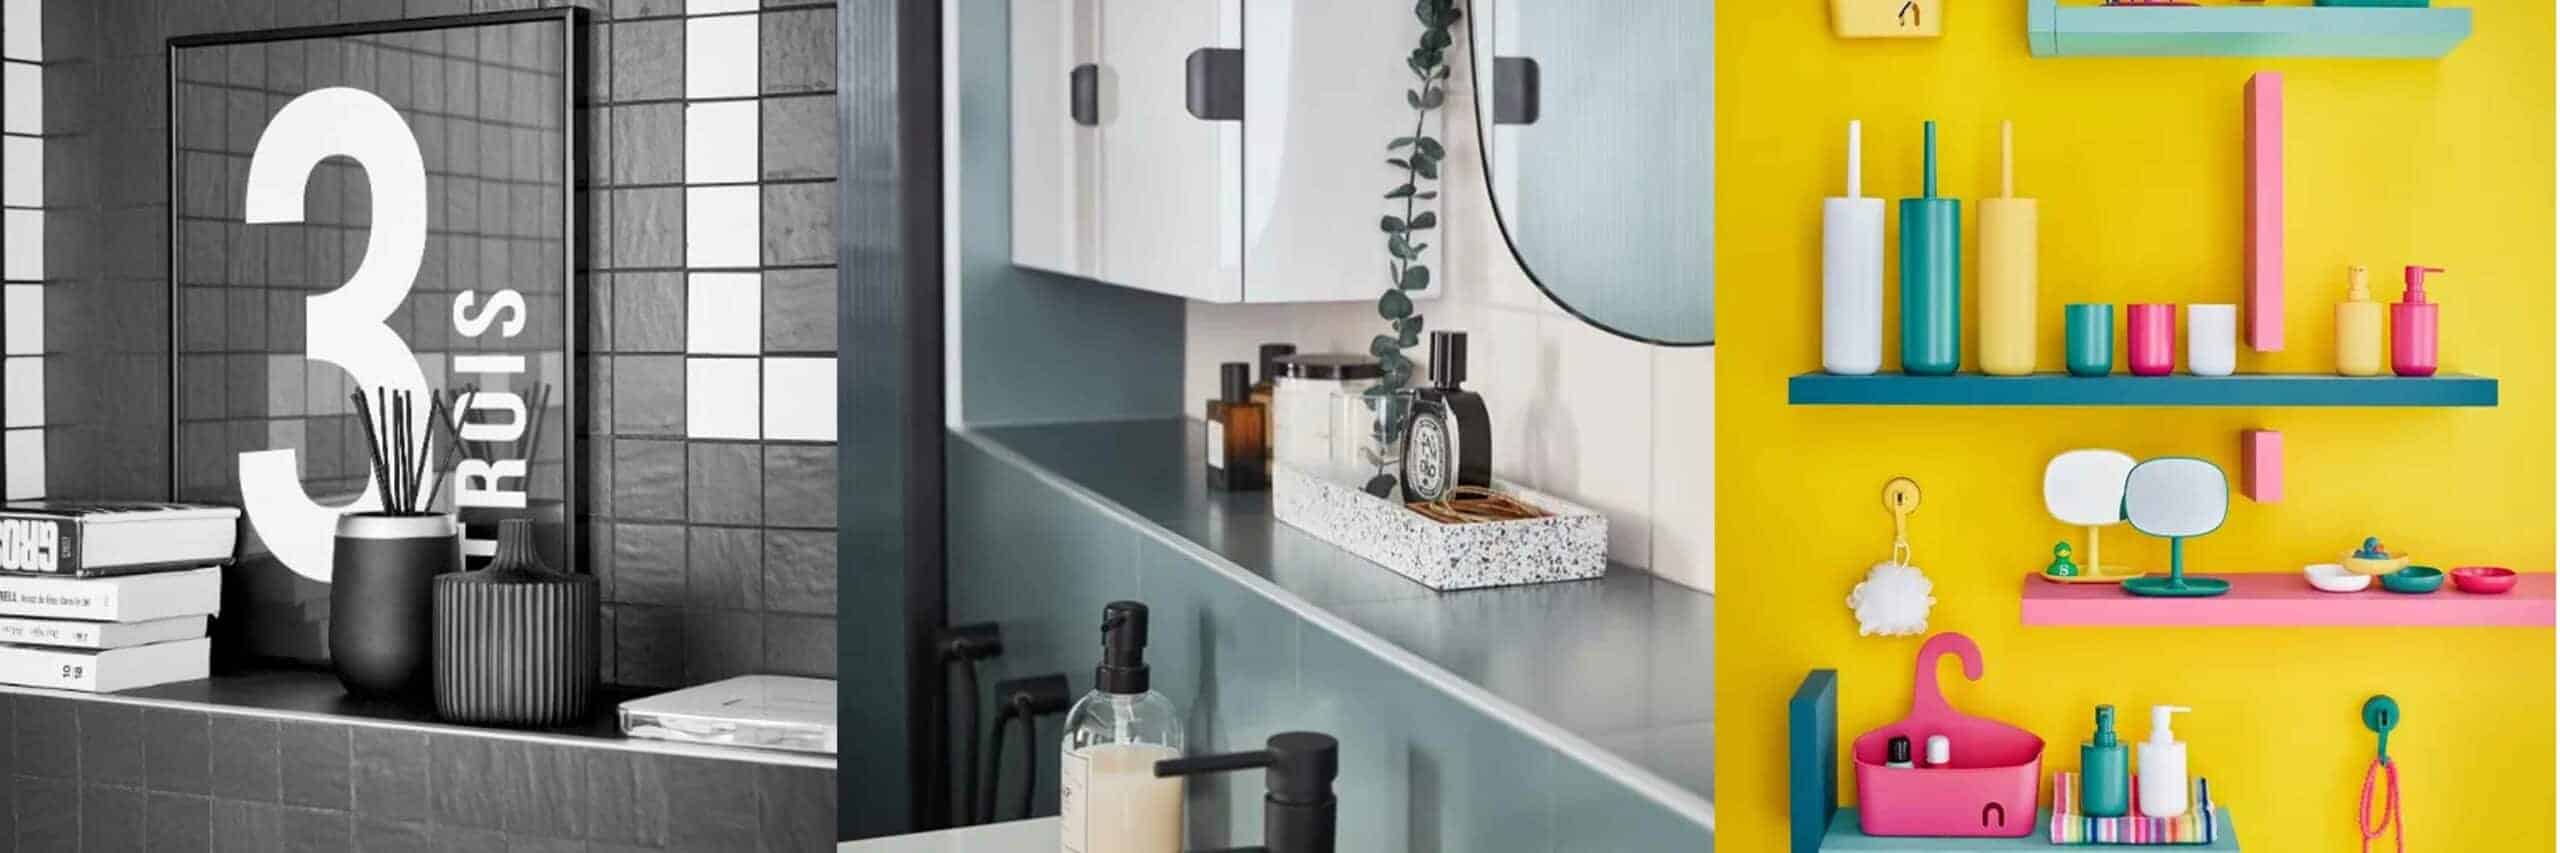 https://evideco.com/wp-content/uploads/2022/04/countertop-accessories-scaled.jpg